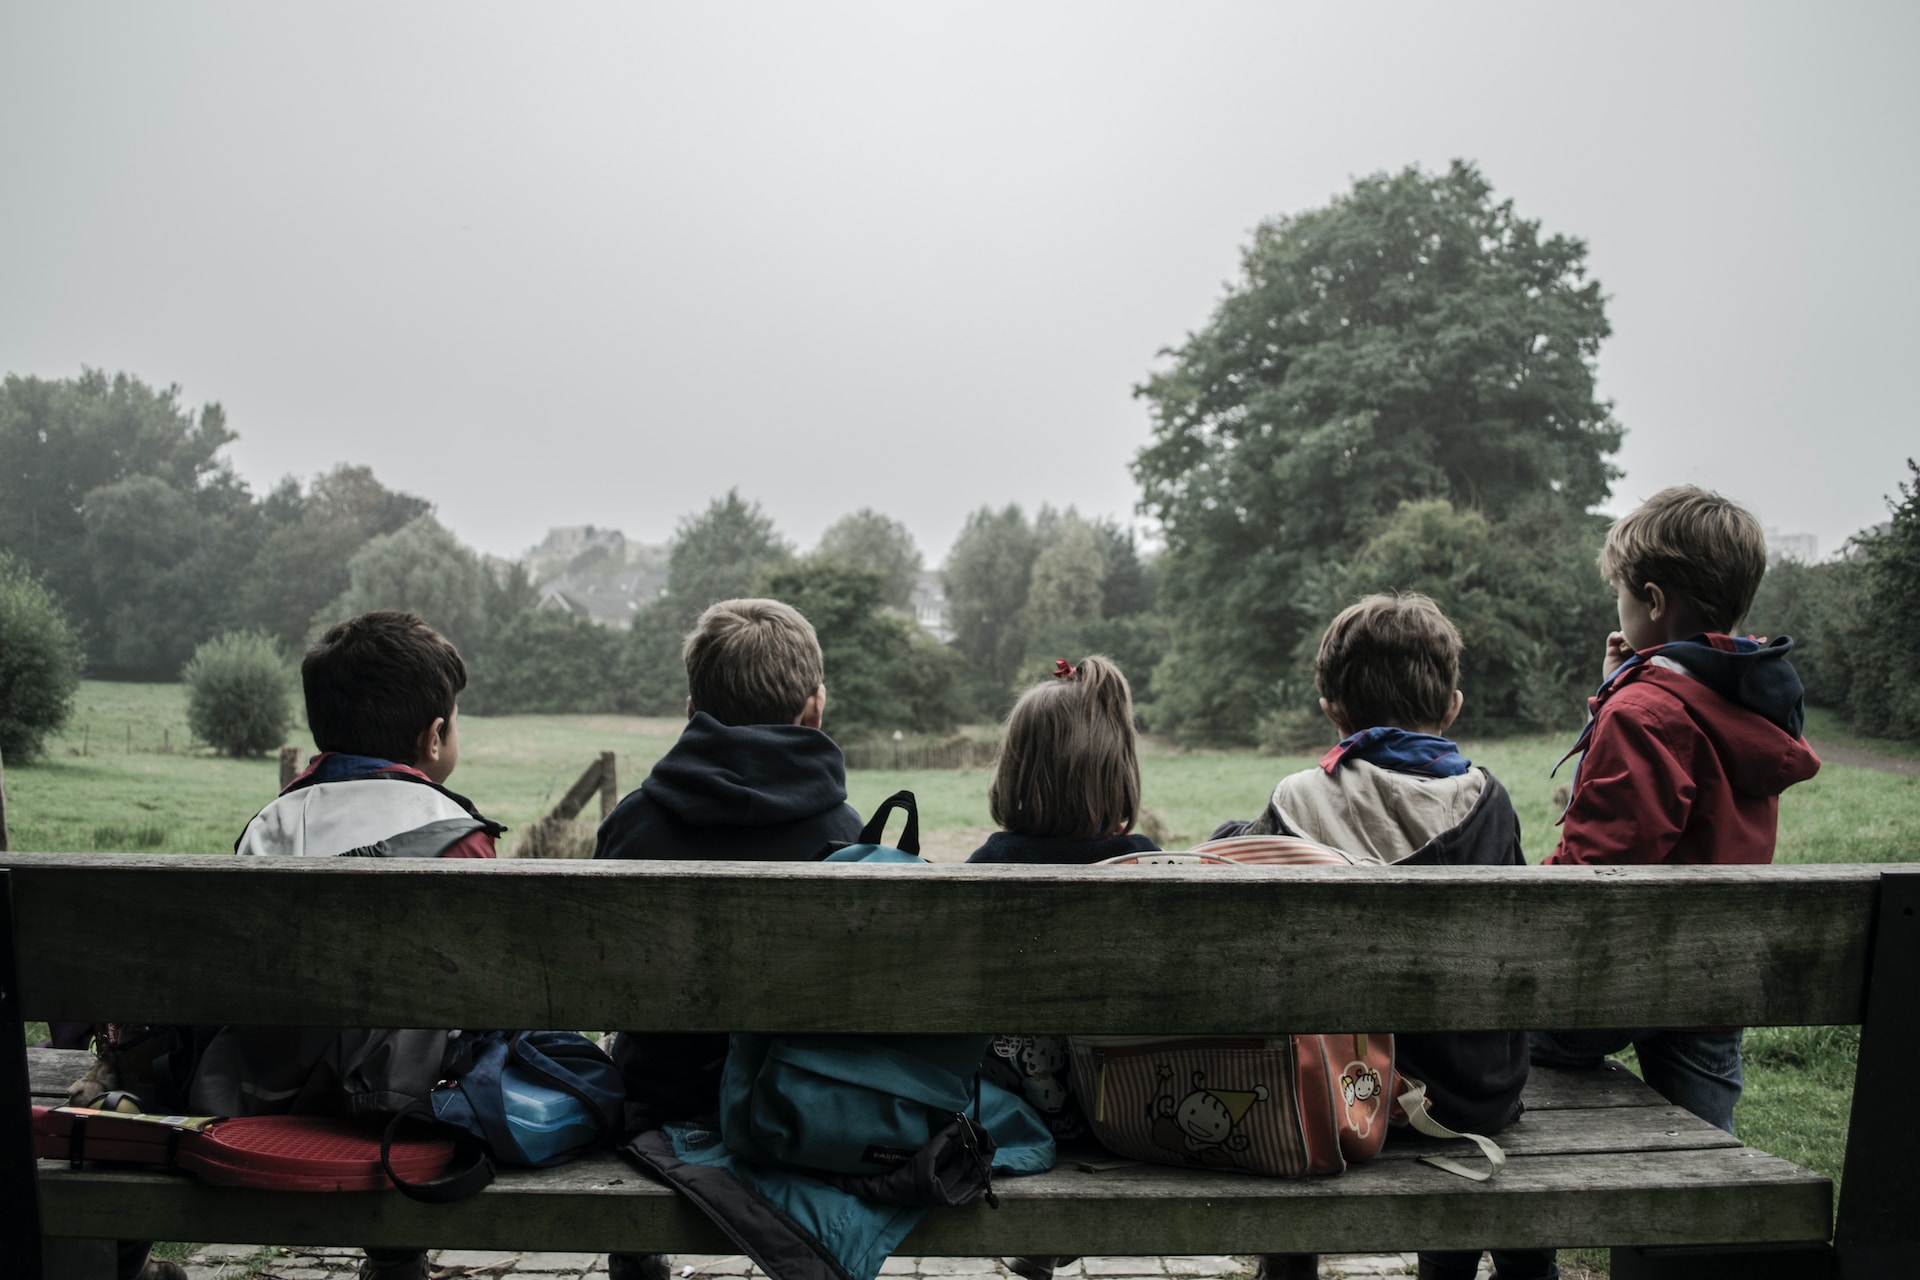 A group of children with rucksacks sat on a bench looking into the field and woods